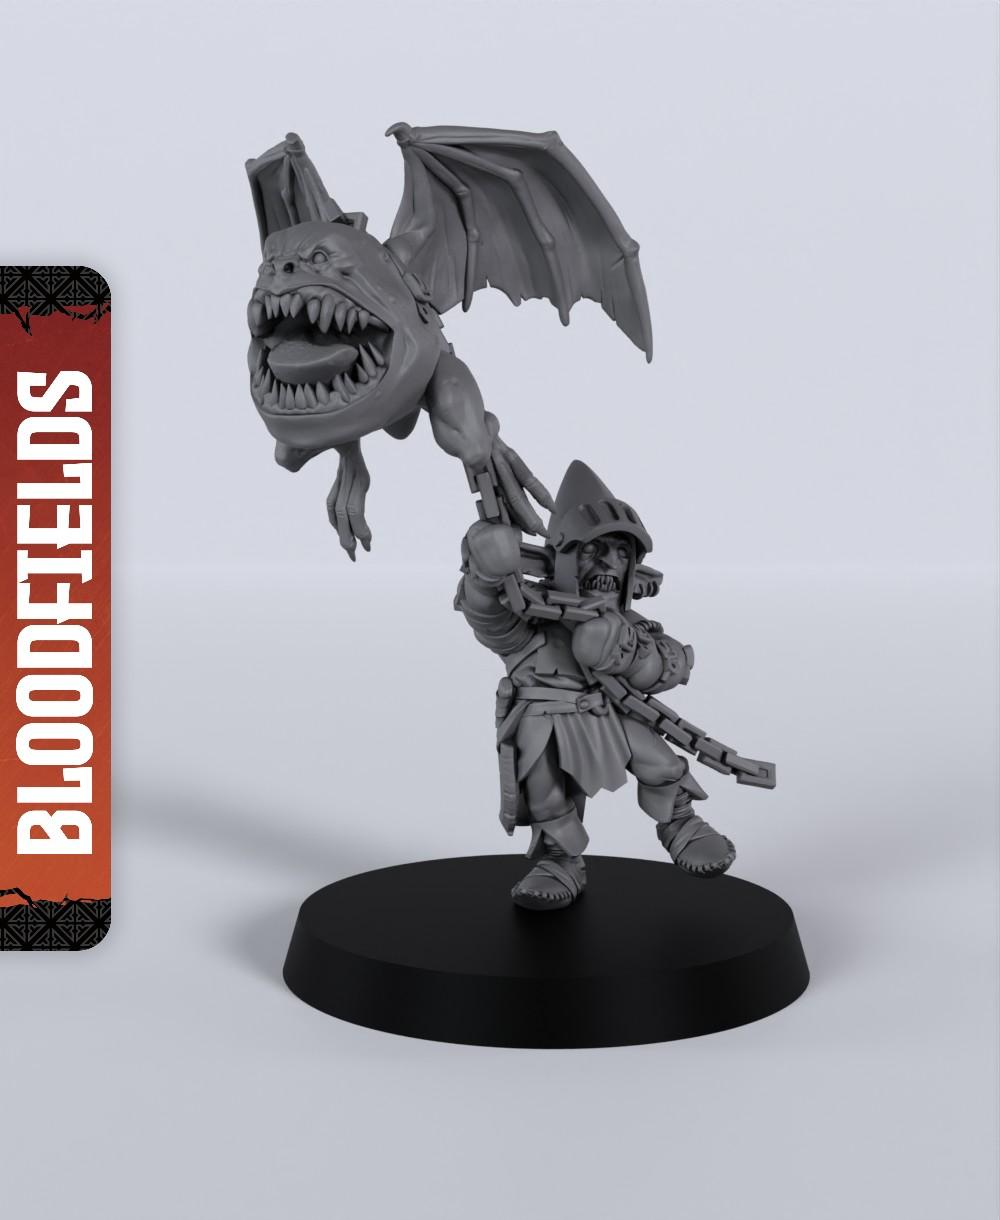 Handler Urugash - With Free Dragon Warhammer - 5e DnD Inspired for RPG and Wargamers 3d model